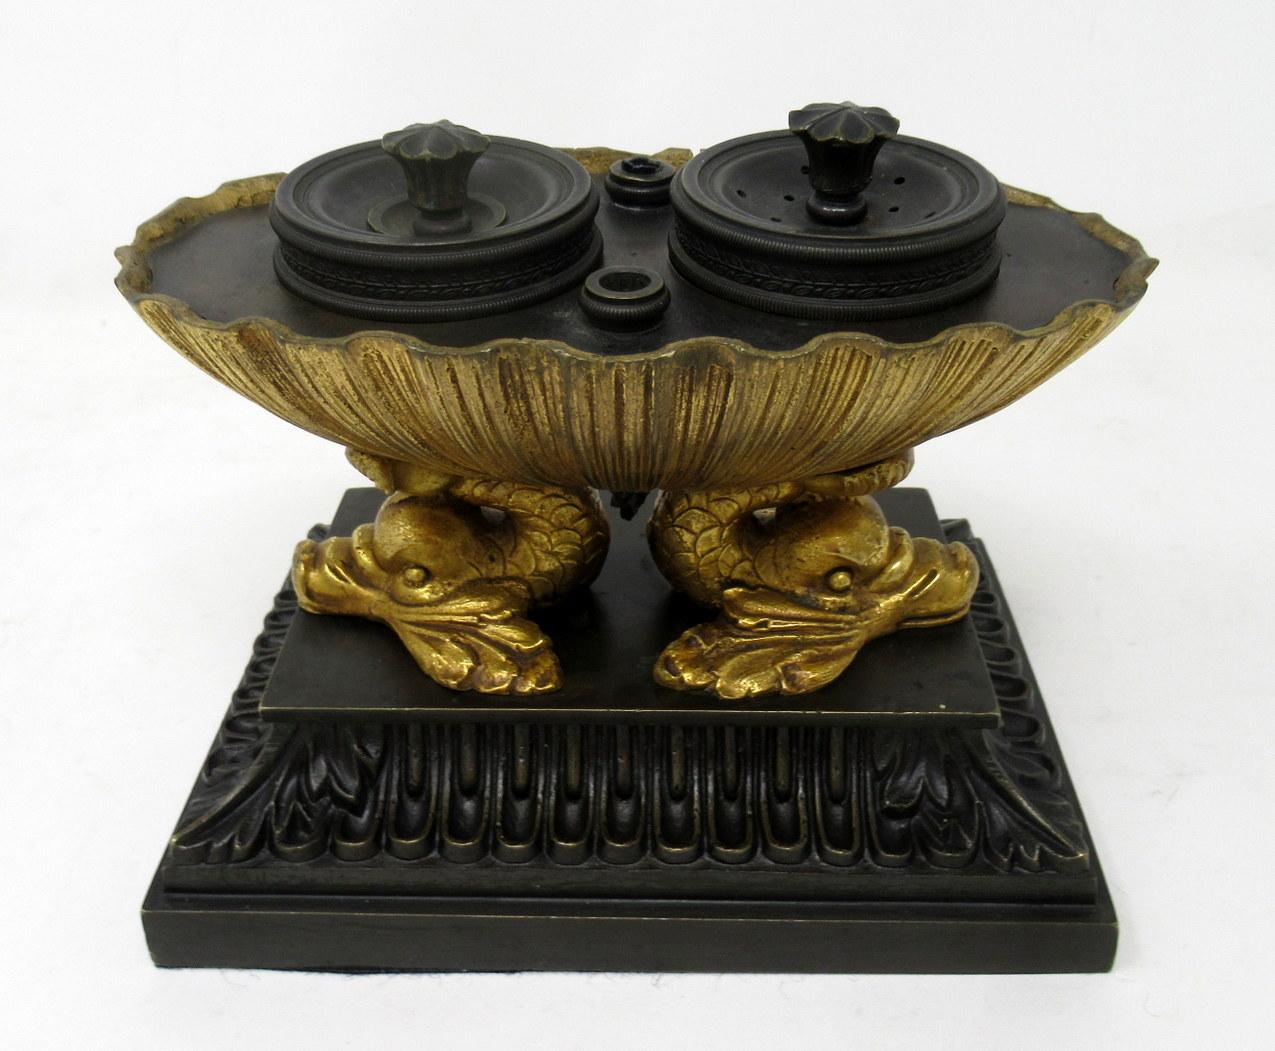 A superb example of an early 19th century Grand Tour English Regency ormolu and patinated bronze inkstand Standish of outstanding quality, in the manner of Thomas Messenger. 

The inverted gilded oval shell enclosing two glass ink bottles fitted